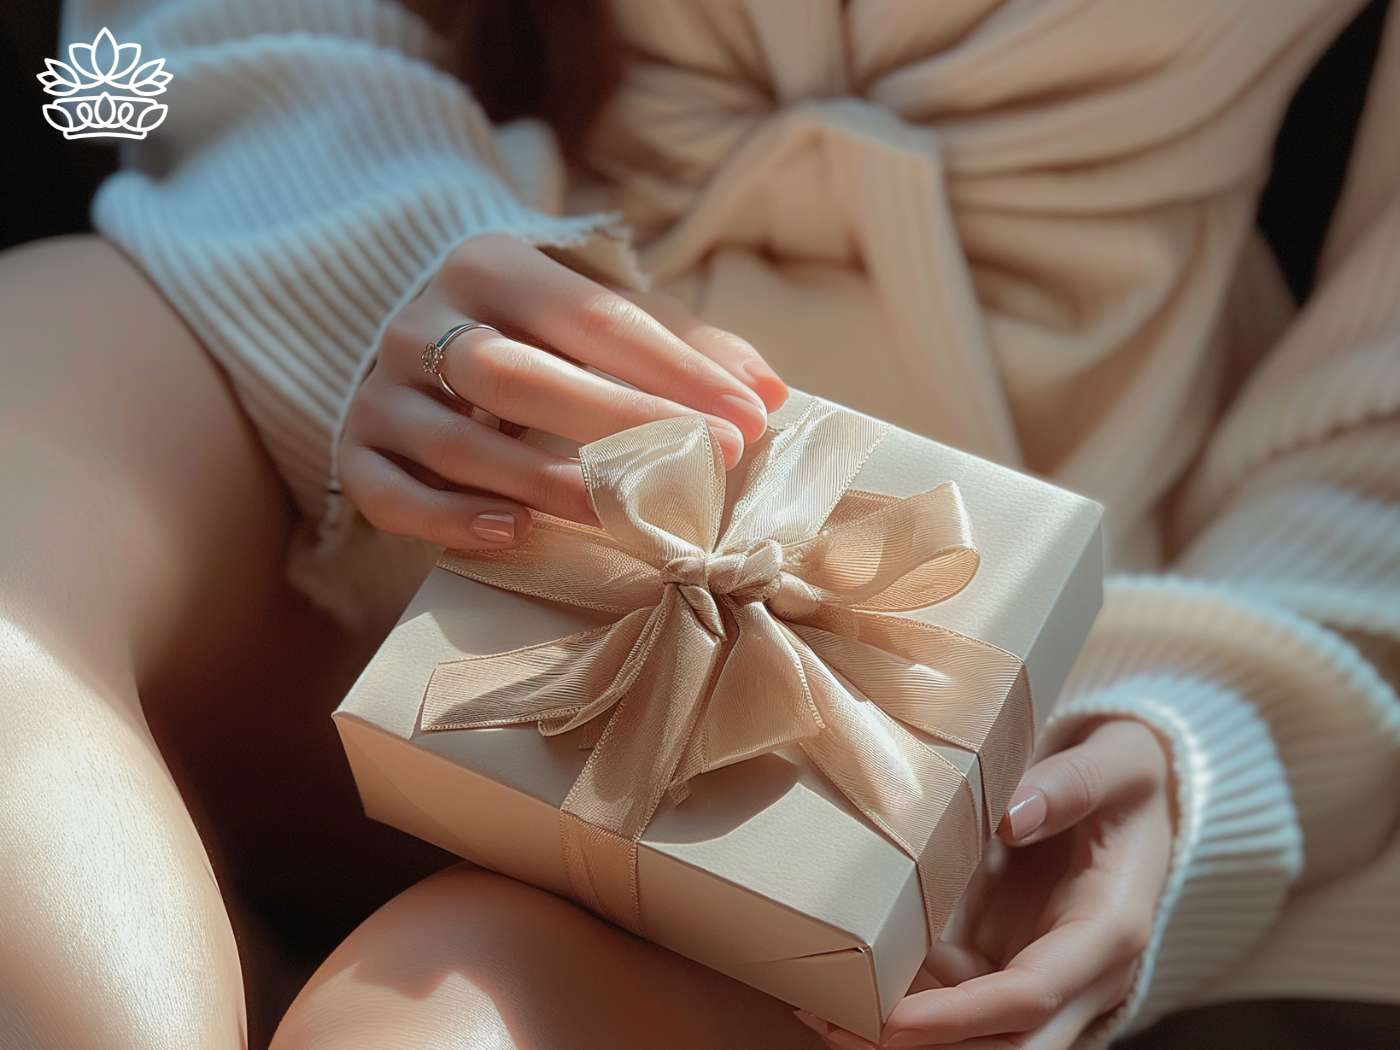 Close-up of hands cradling an elegant beige gift box with a satin ribbon, part of the 'All Gift Boxes' collection from Fabulous Flowers and Gifts